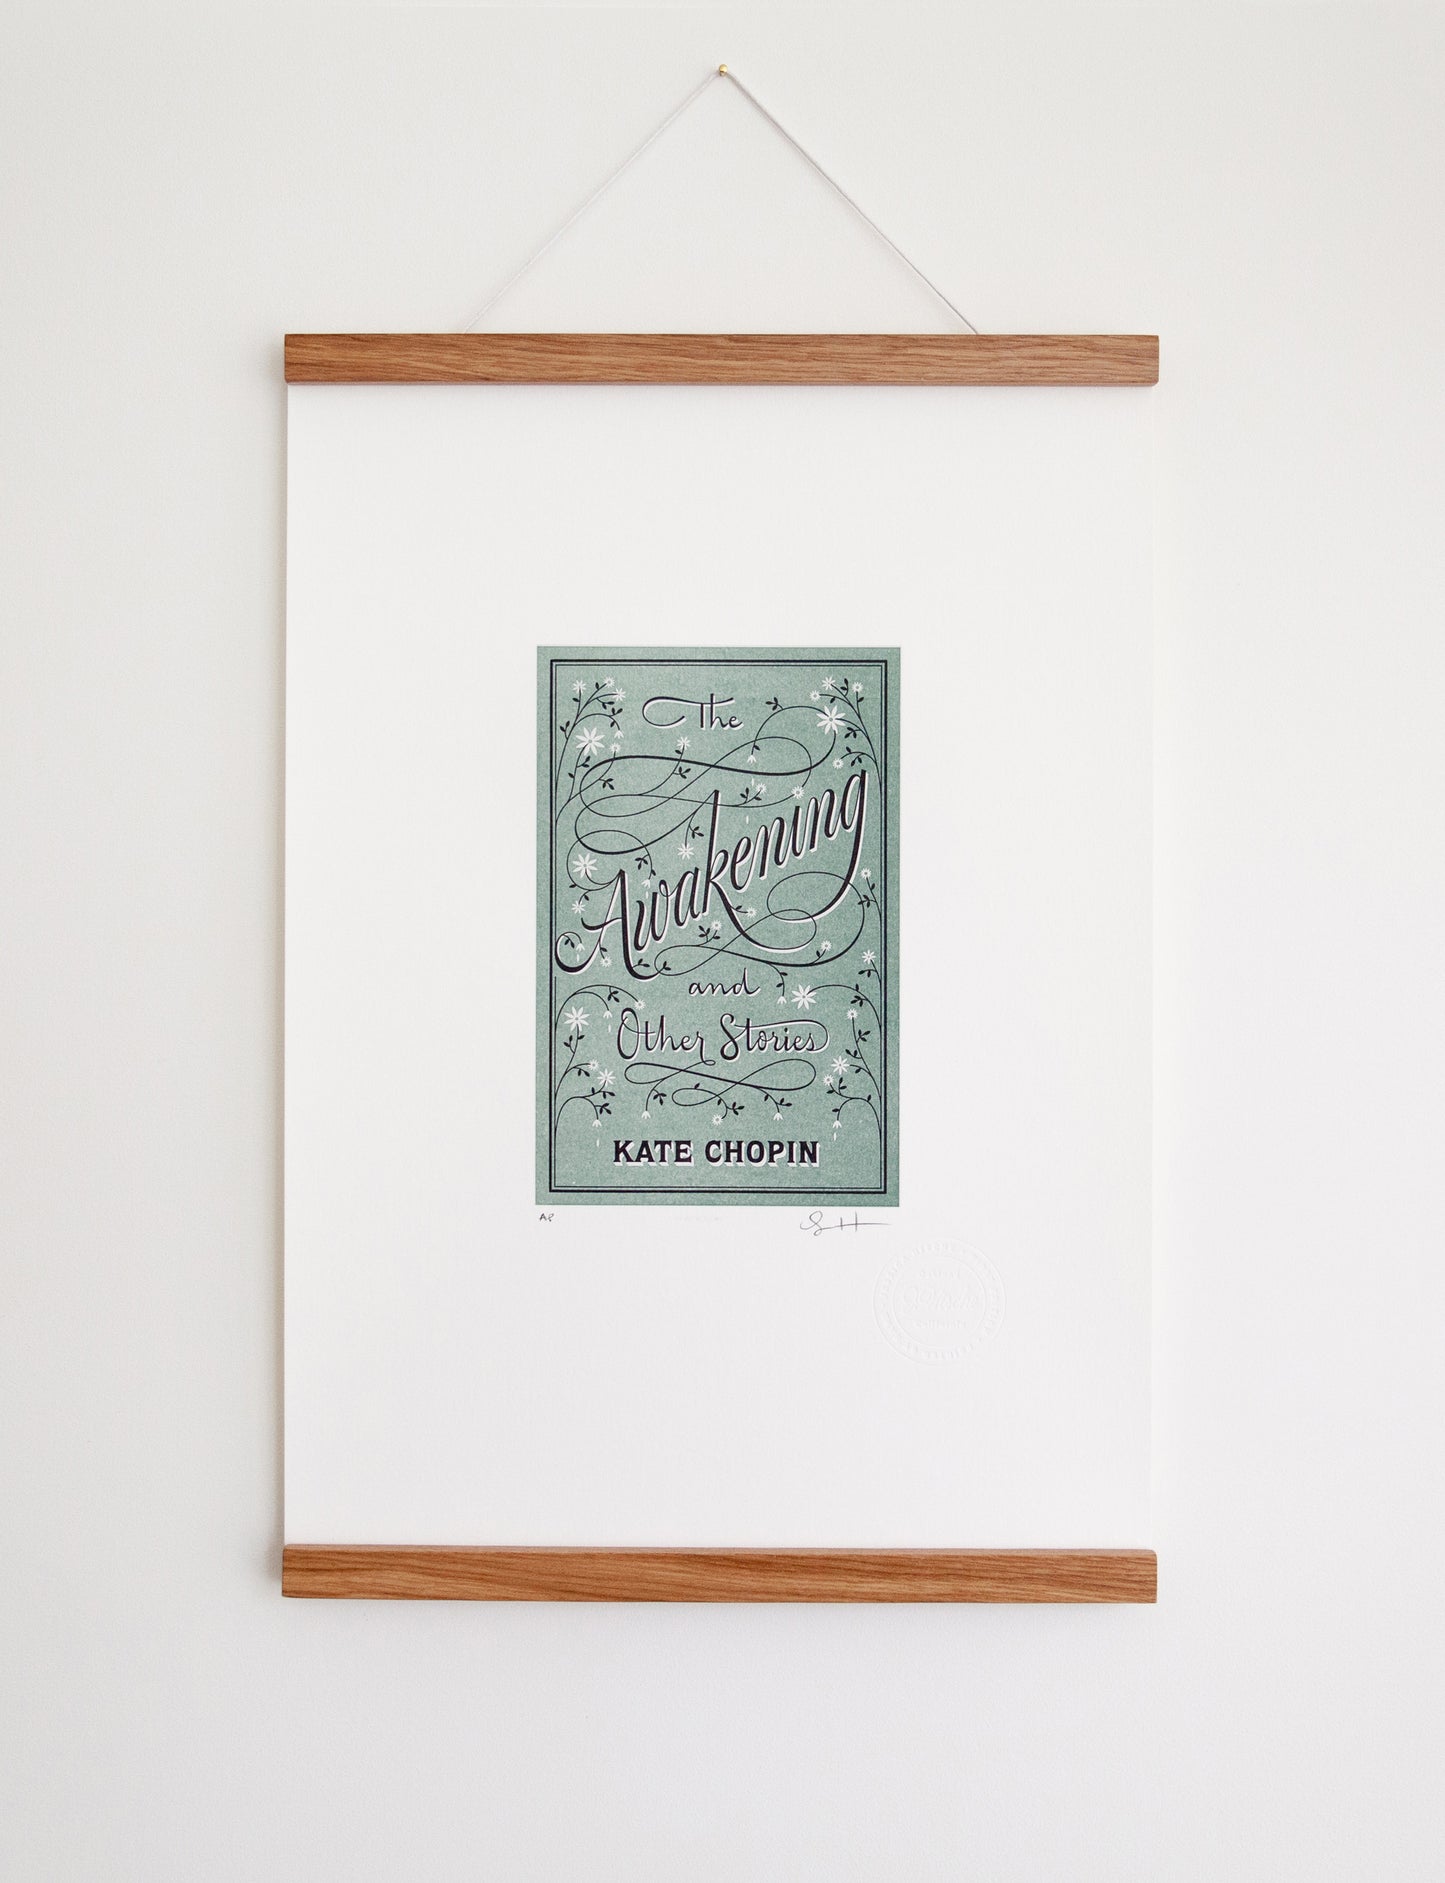 Framed 2-color letterpress print in green and black. Printed artwork is an illustrated book cover of The Adventures of The Awakening including custom hand lettering.